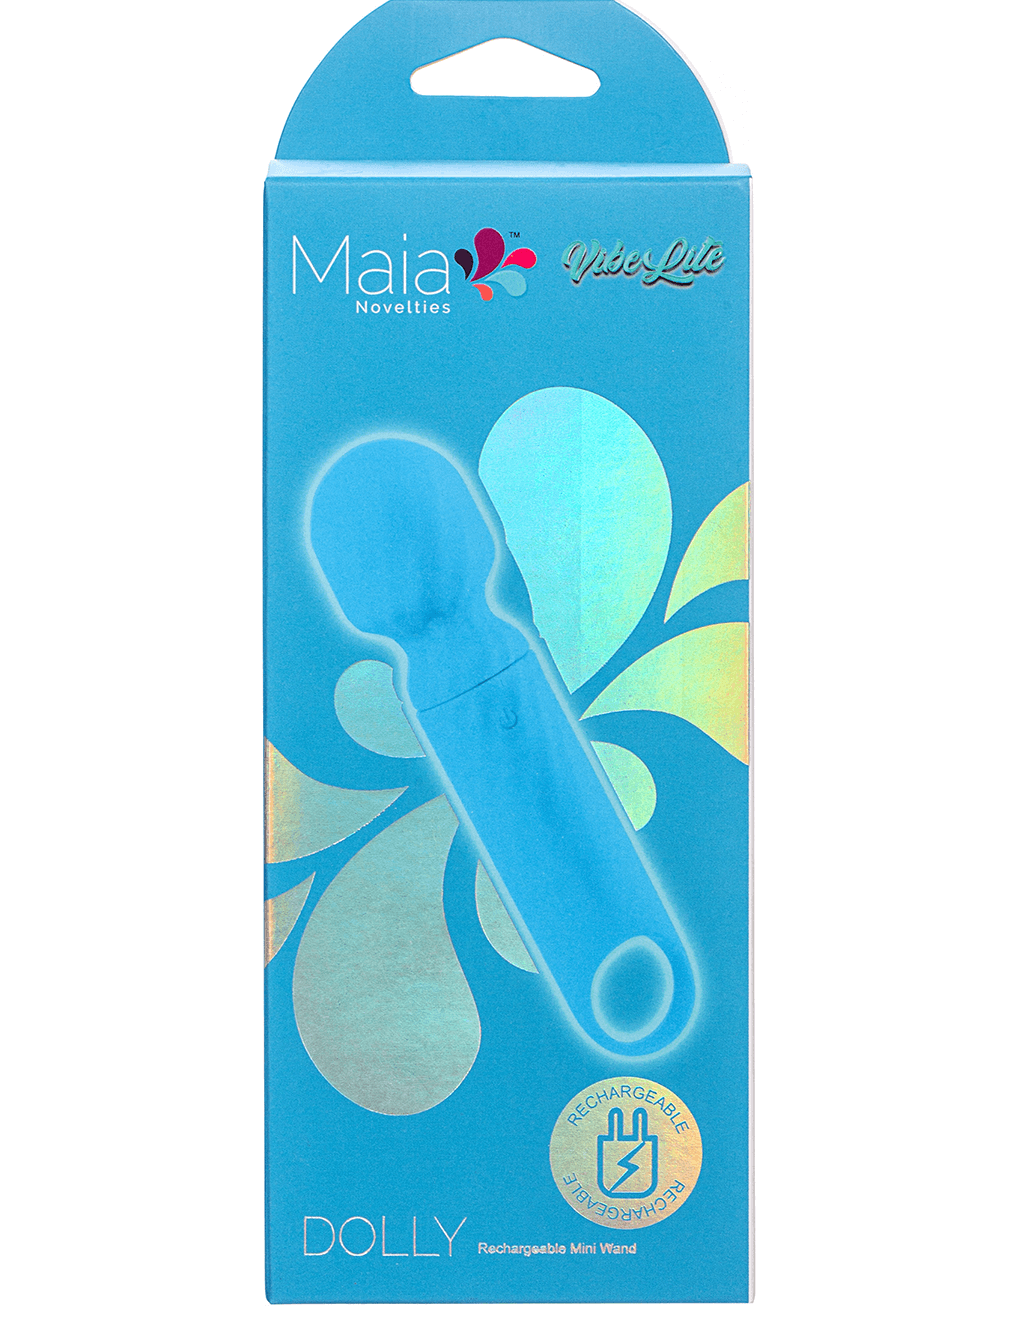 Maia Dolly Rechargeable Mini Wand